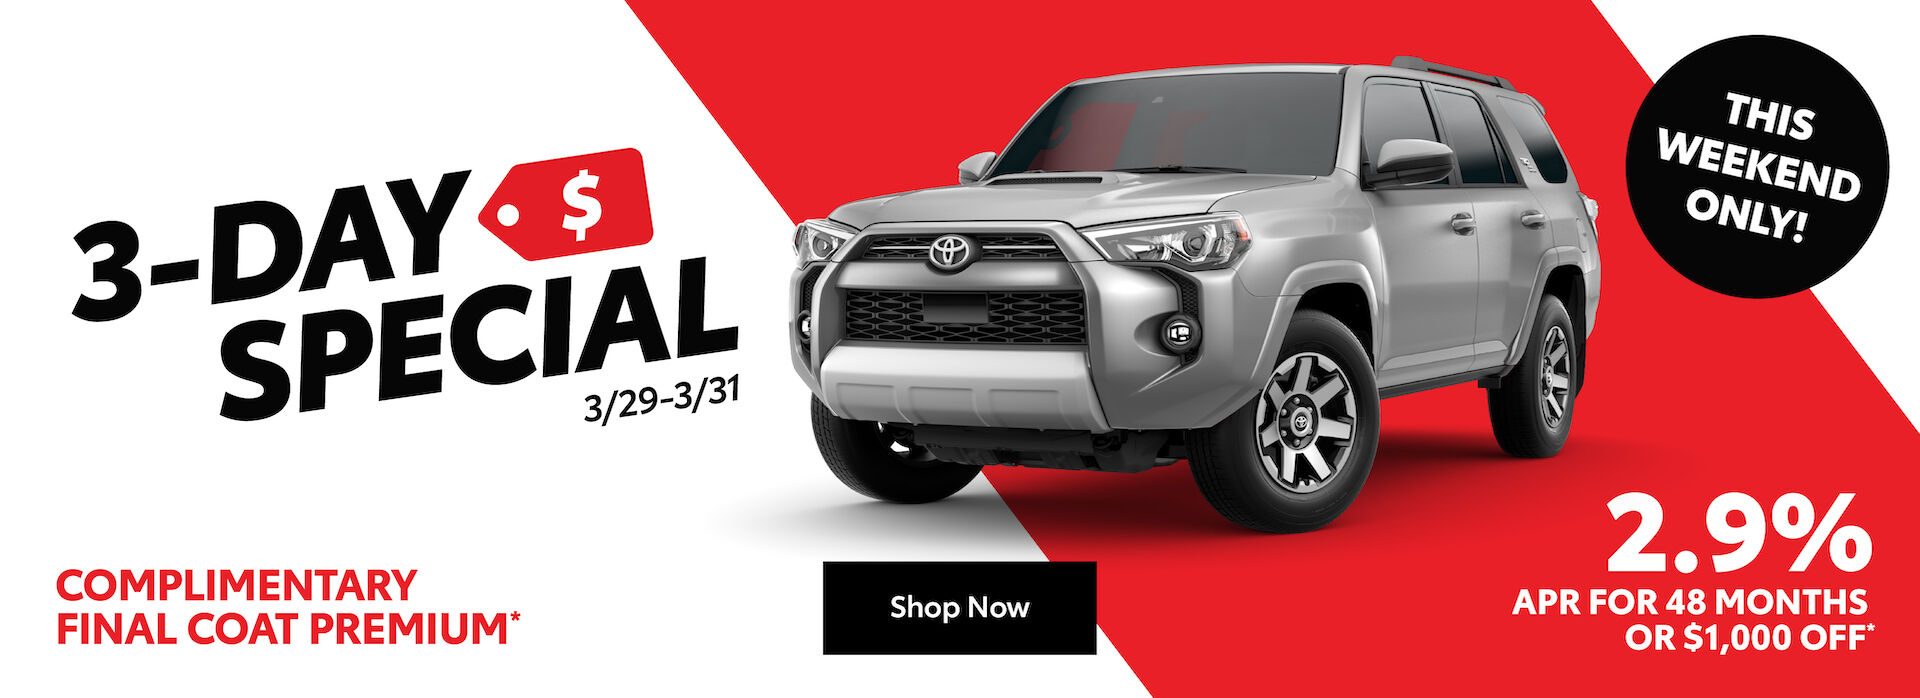 Servco Toyota 3-Day Special! Get 2.9% APR for 48 months or $1,000 off, plus complimentary final coat premium on a new 2024 4Runner.